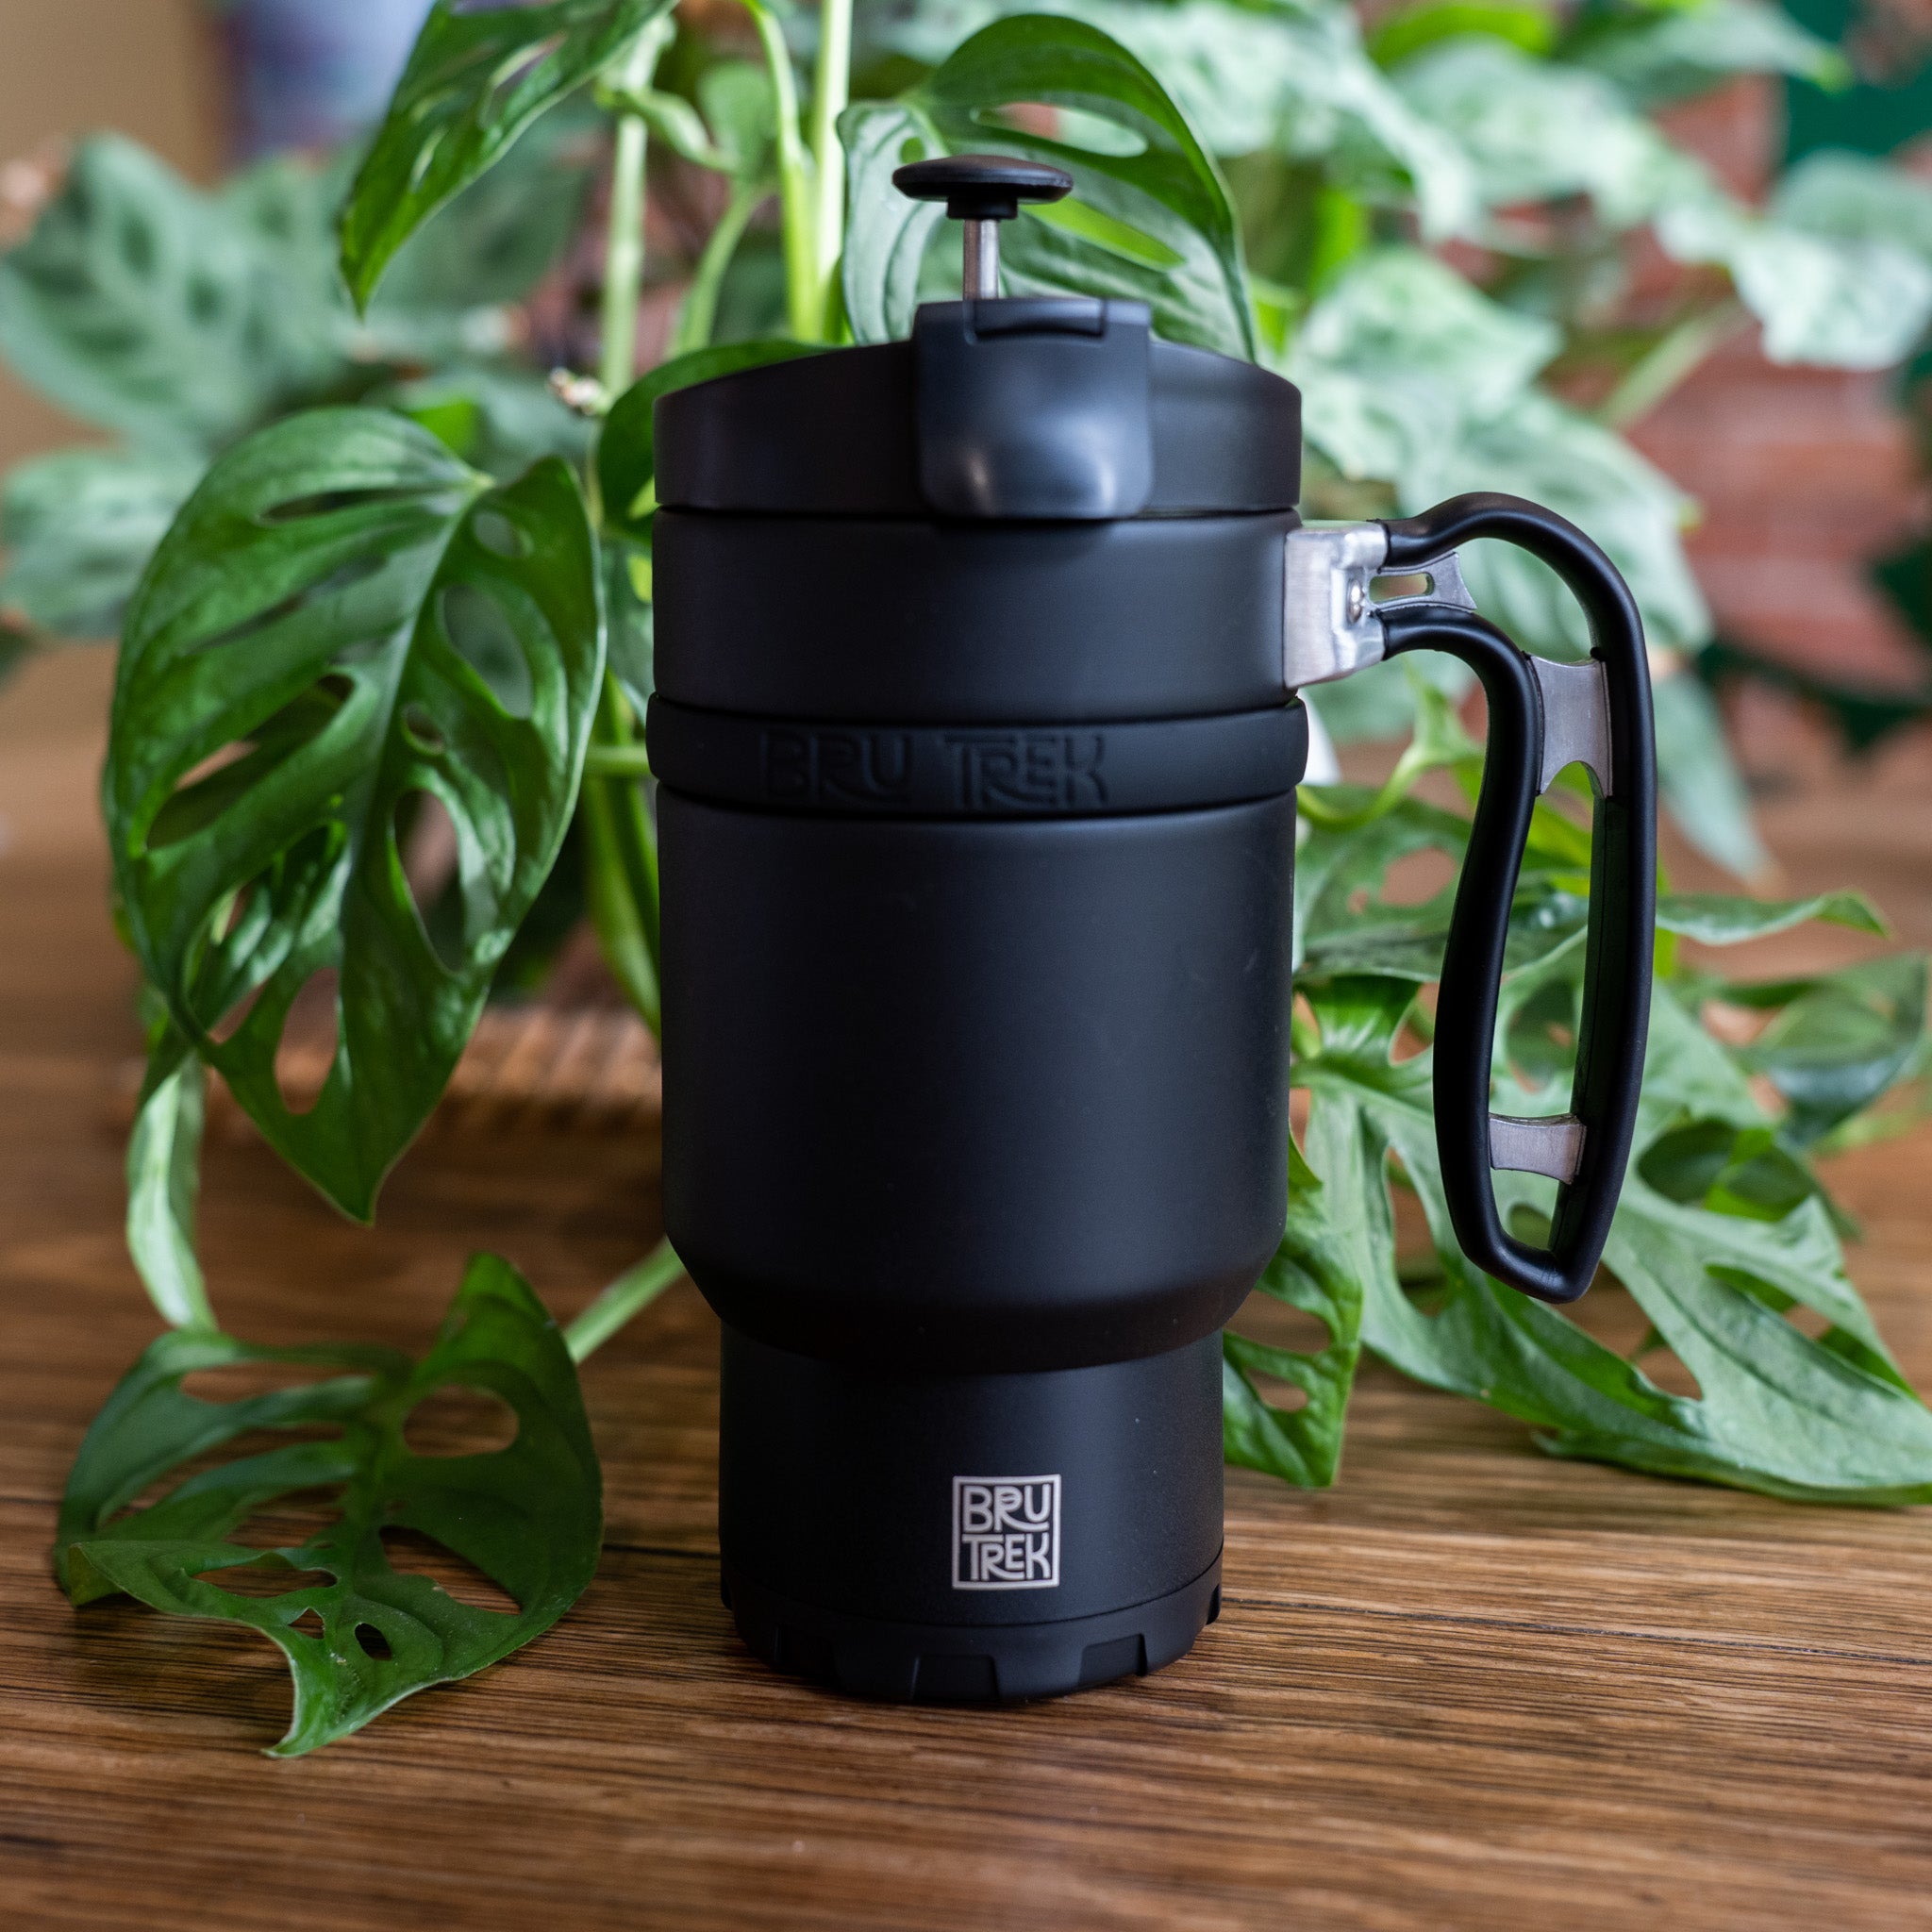 BruTrek Double Shot 3.0 Travel Coffee French Press, 16 fl.oz Insulated  Stainless Steel Mug, Removable Storage Bottom For Beans Grounds Tea Leaves,  Brew A Second Cup, No Spill Lid (Storm Gray)